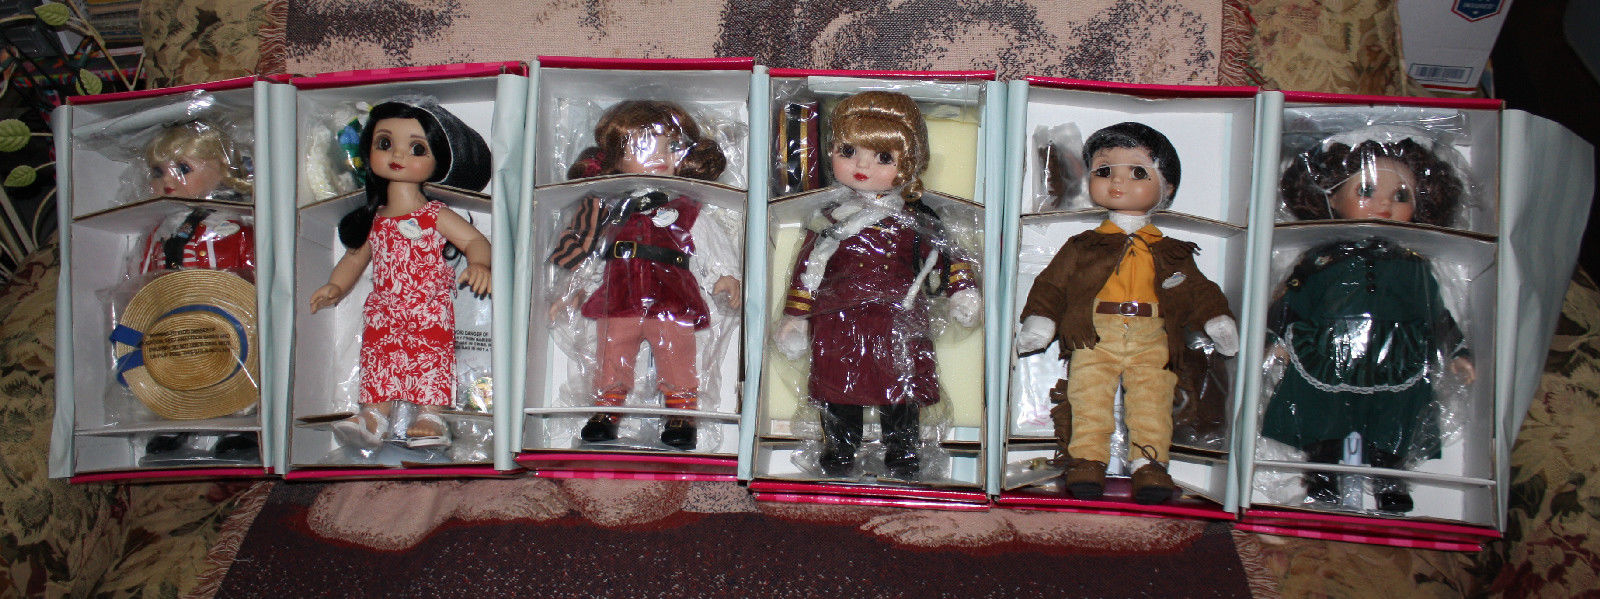 Signed MARIE OSMOND DISNEY ADORA BELLE DOLL COLLECTION Pirates Haunted Mansion